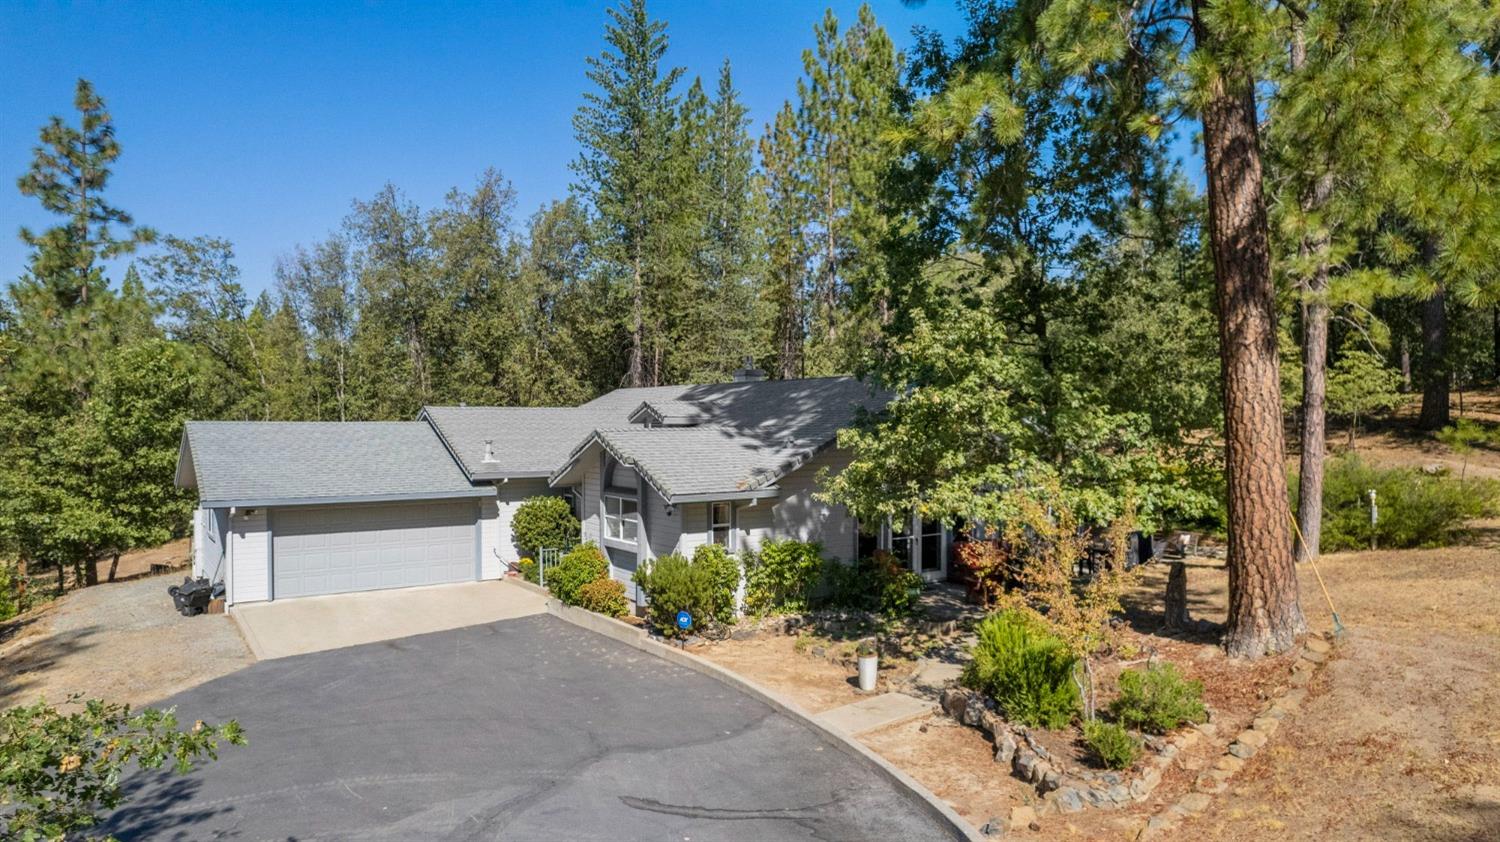 Photo of 10388 Dexter Ln in Coulterville, CA